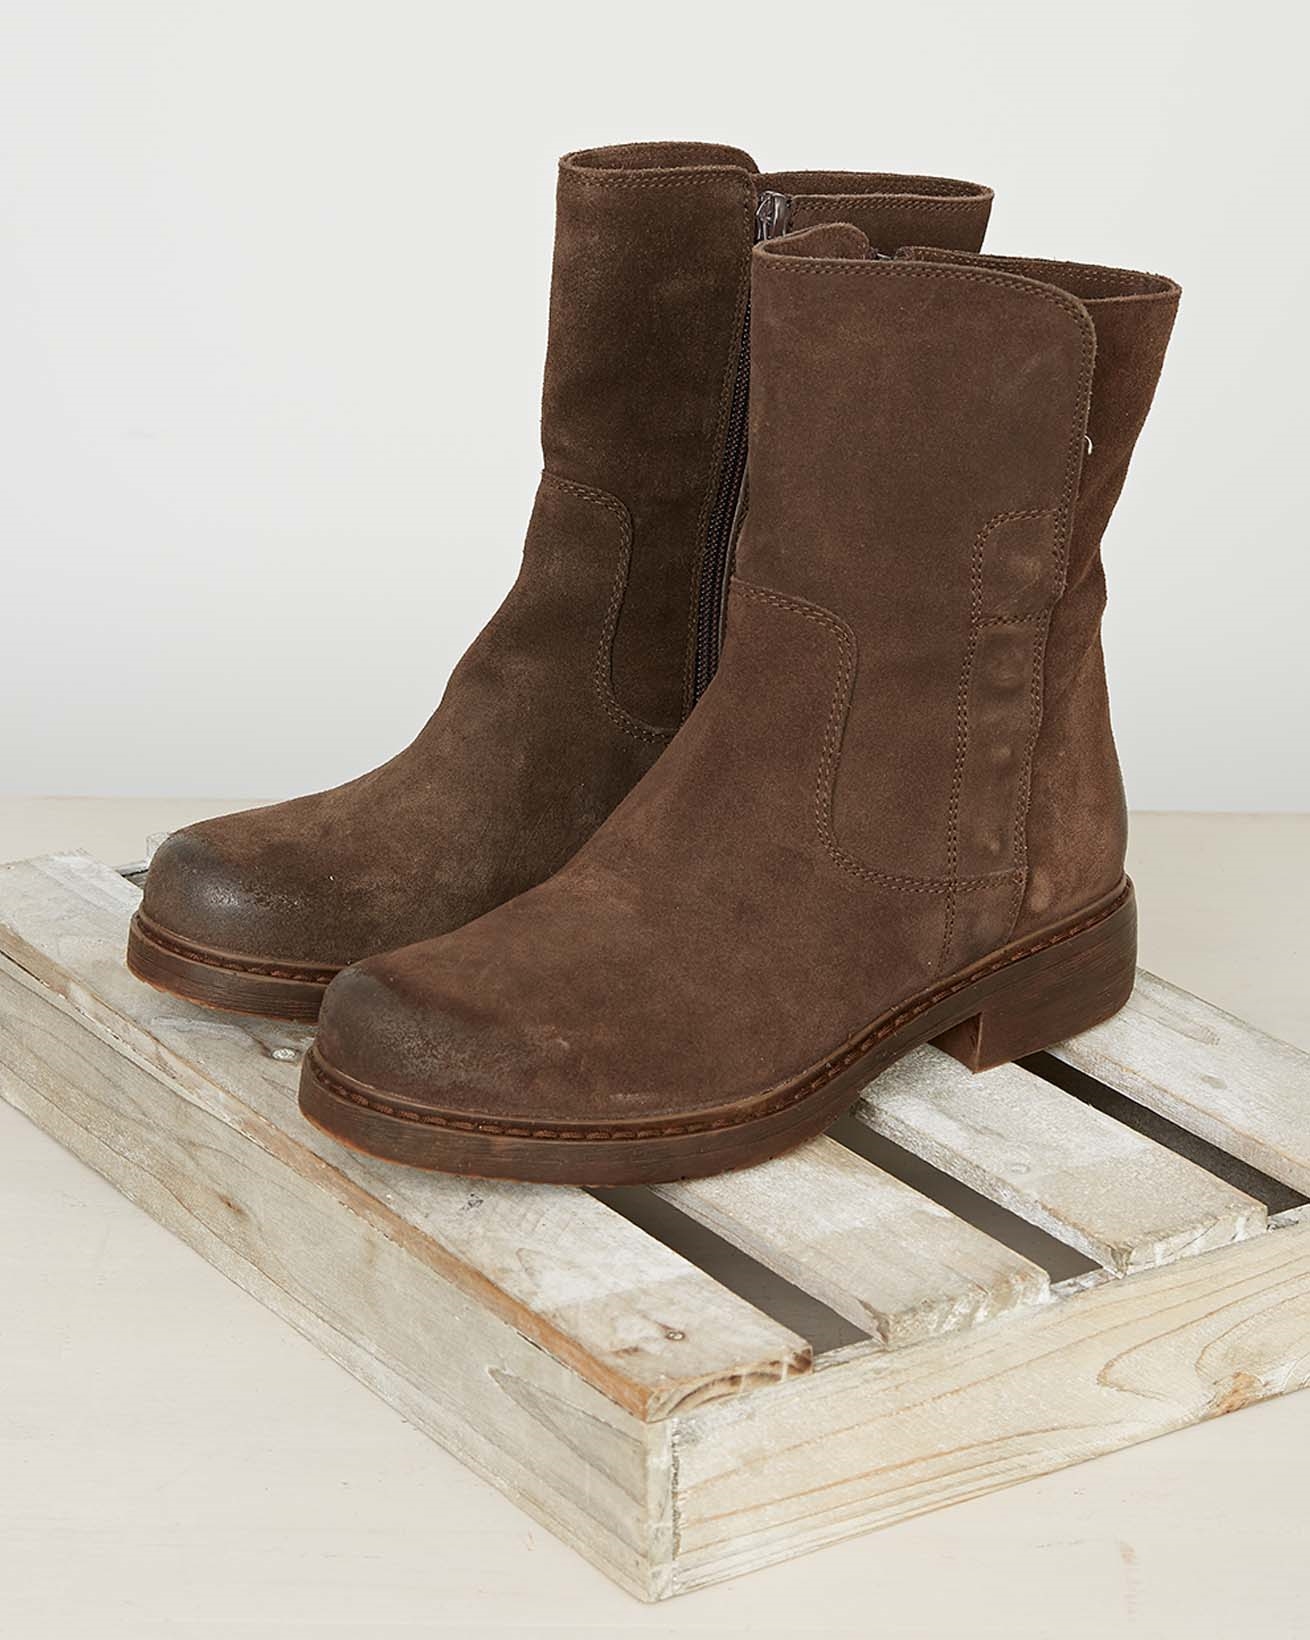 Essential Leather Ankle Boot / Chocolate / 37